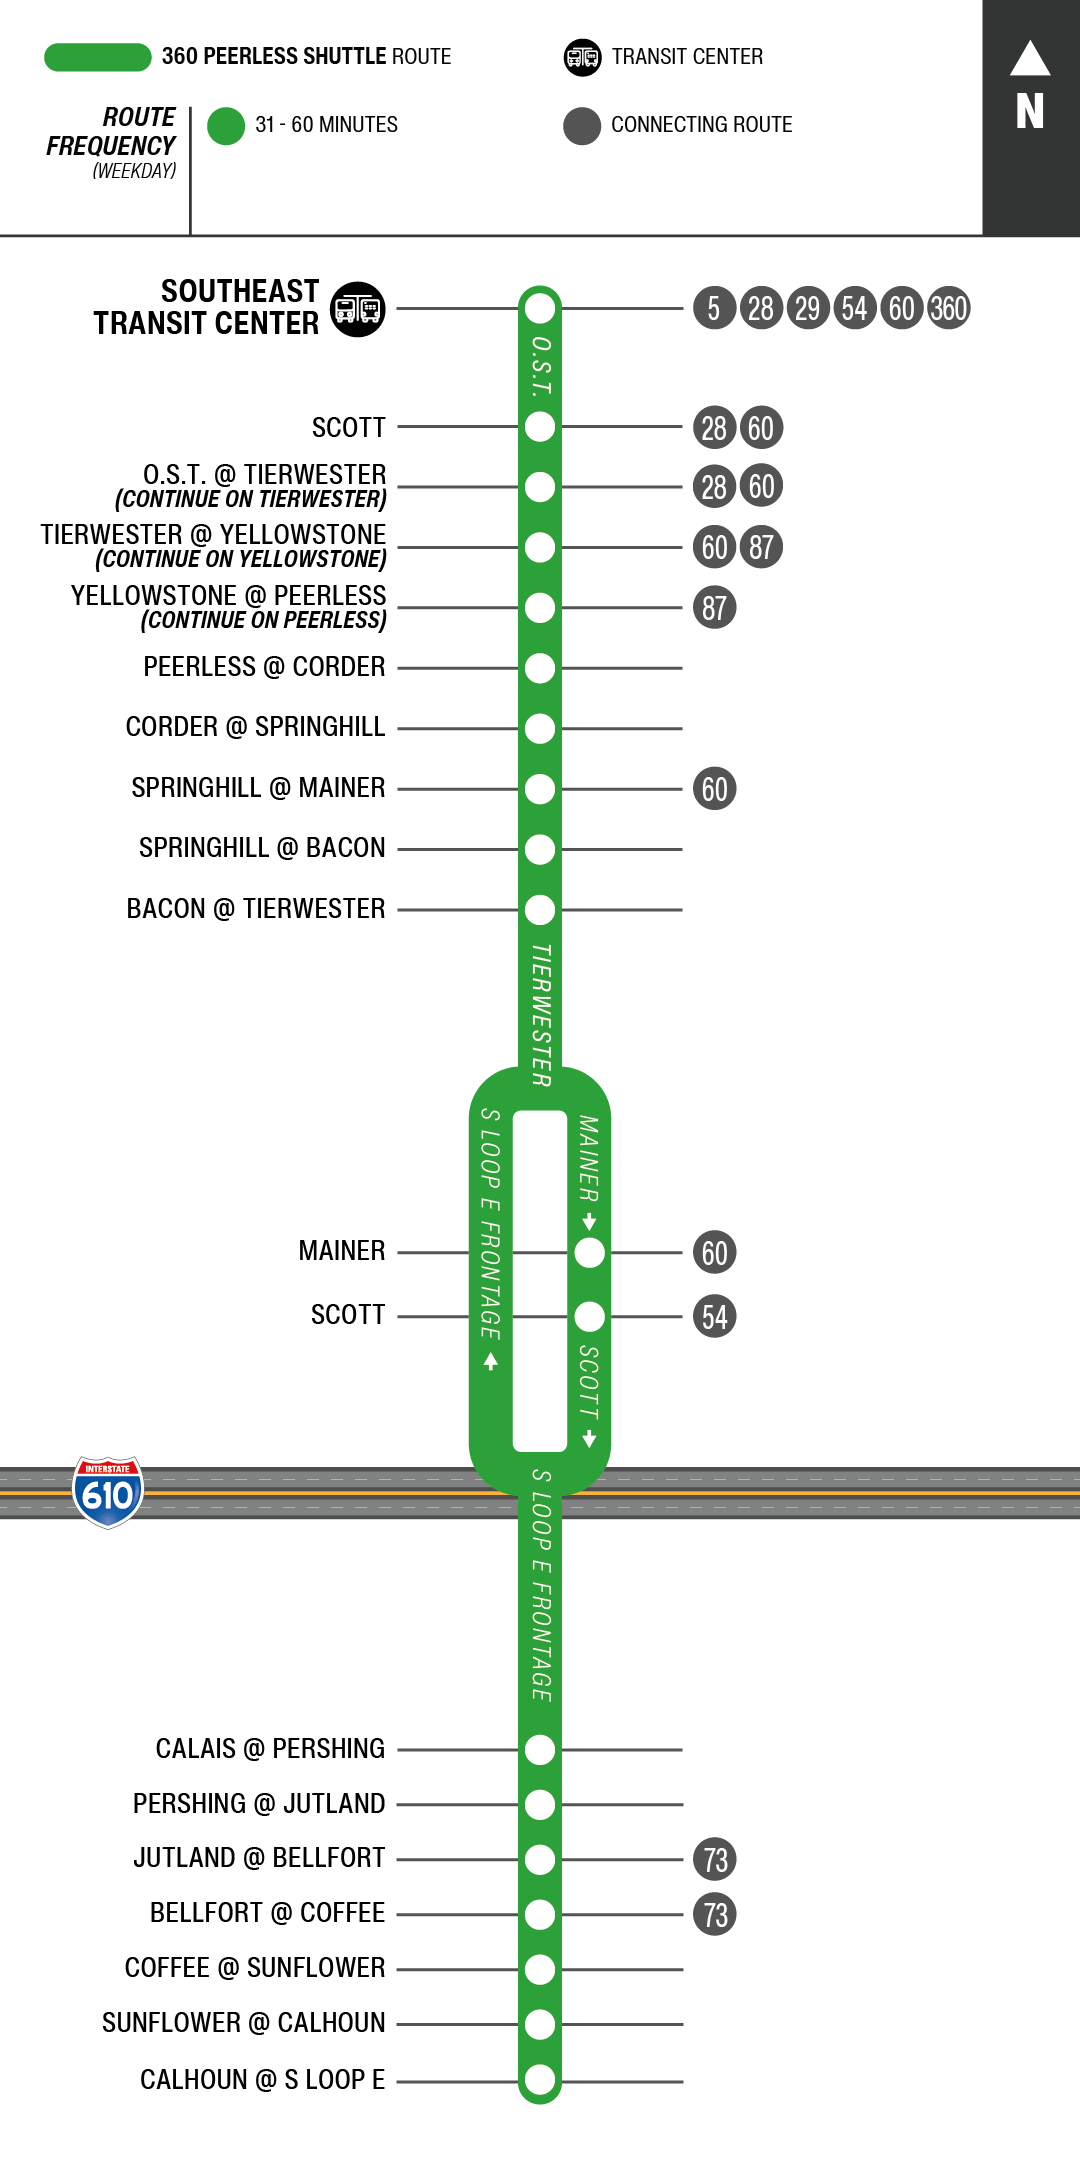 Route map for 360 Peerless Shuttle bus